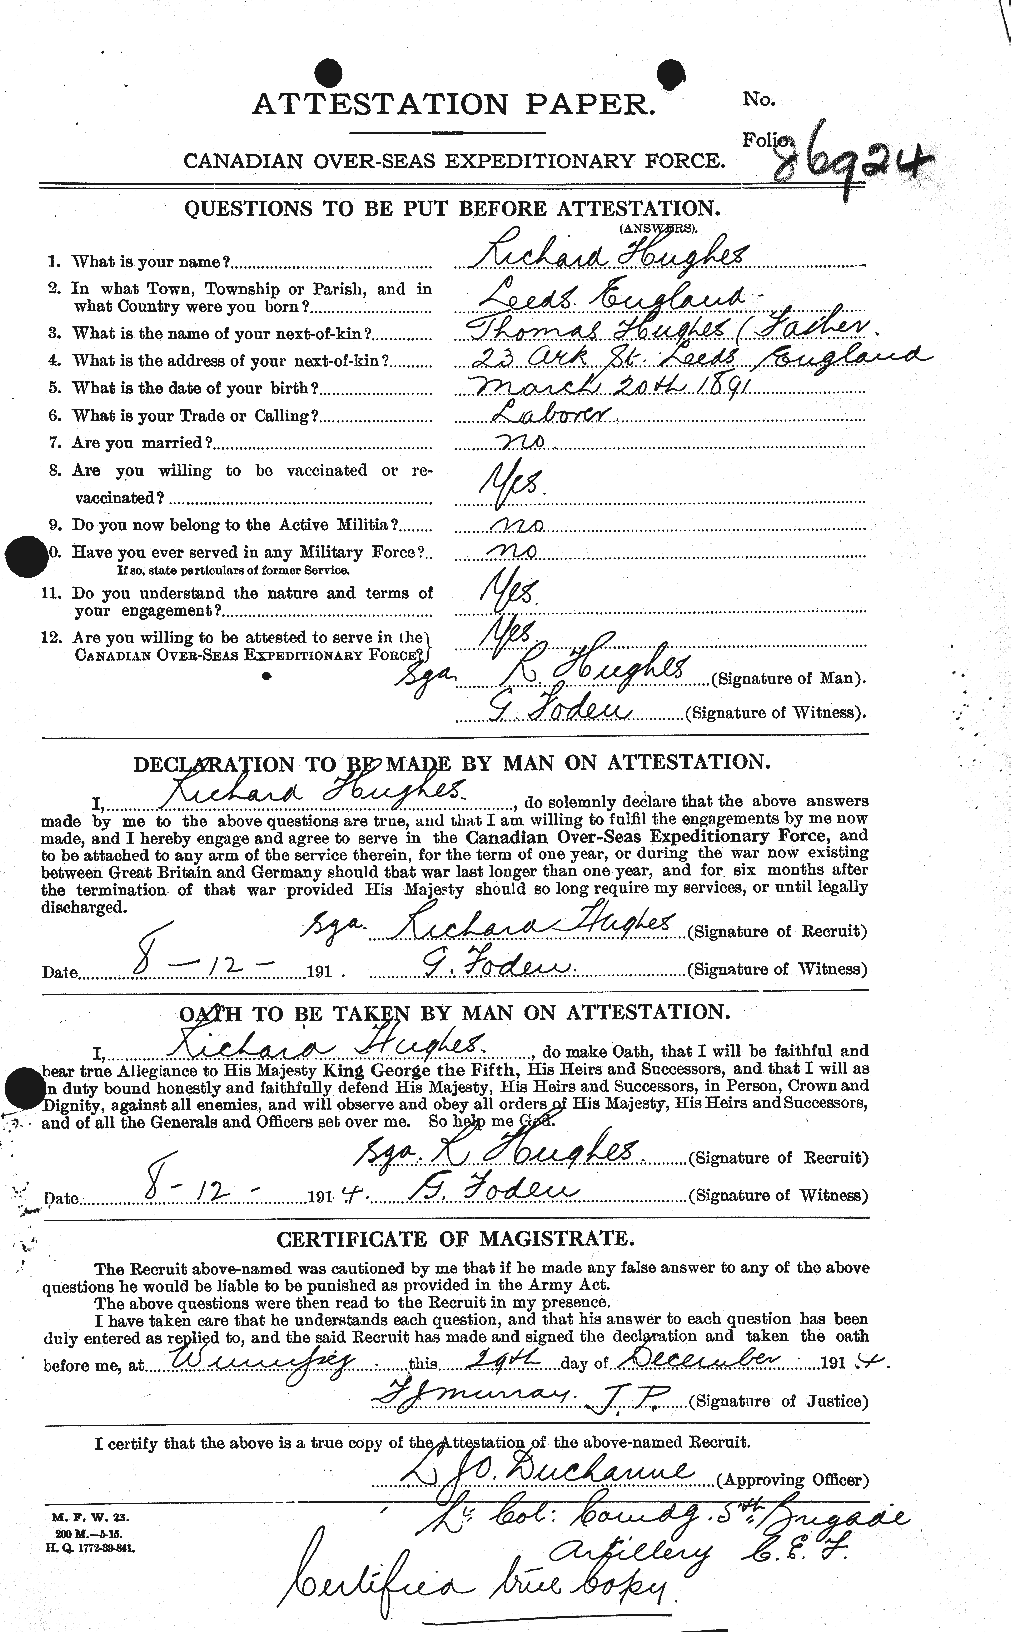 Personnel Records of the First World War - CEF 404179a